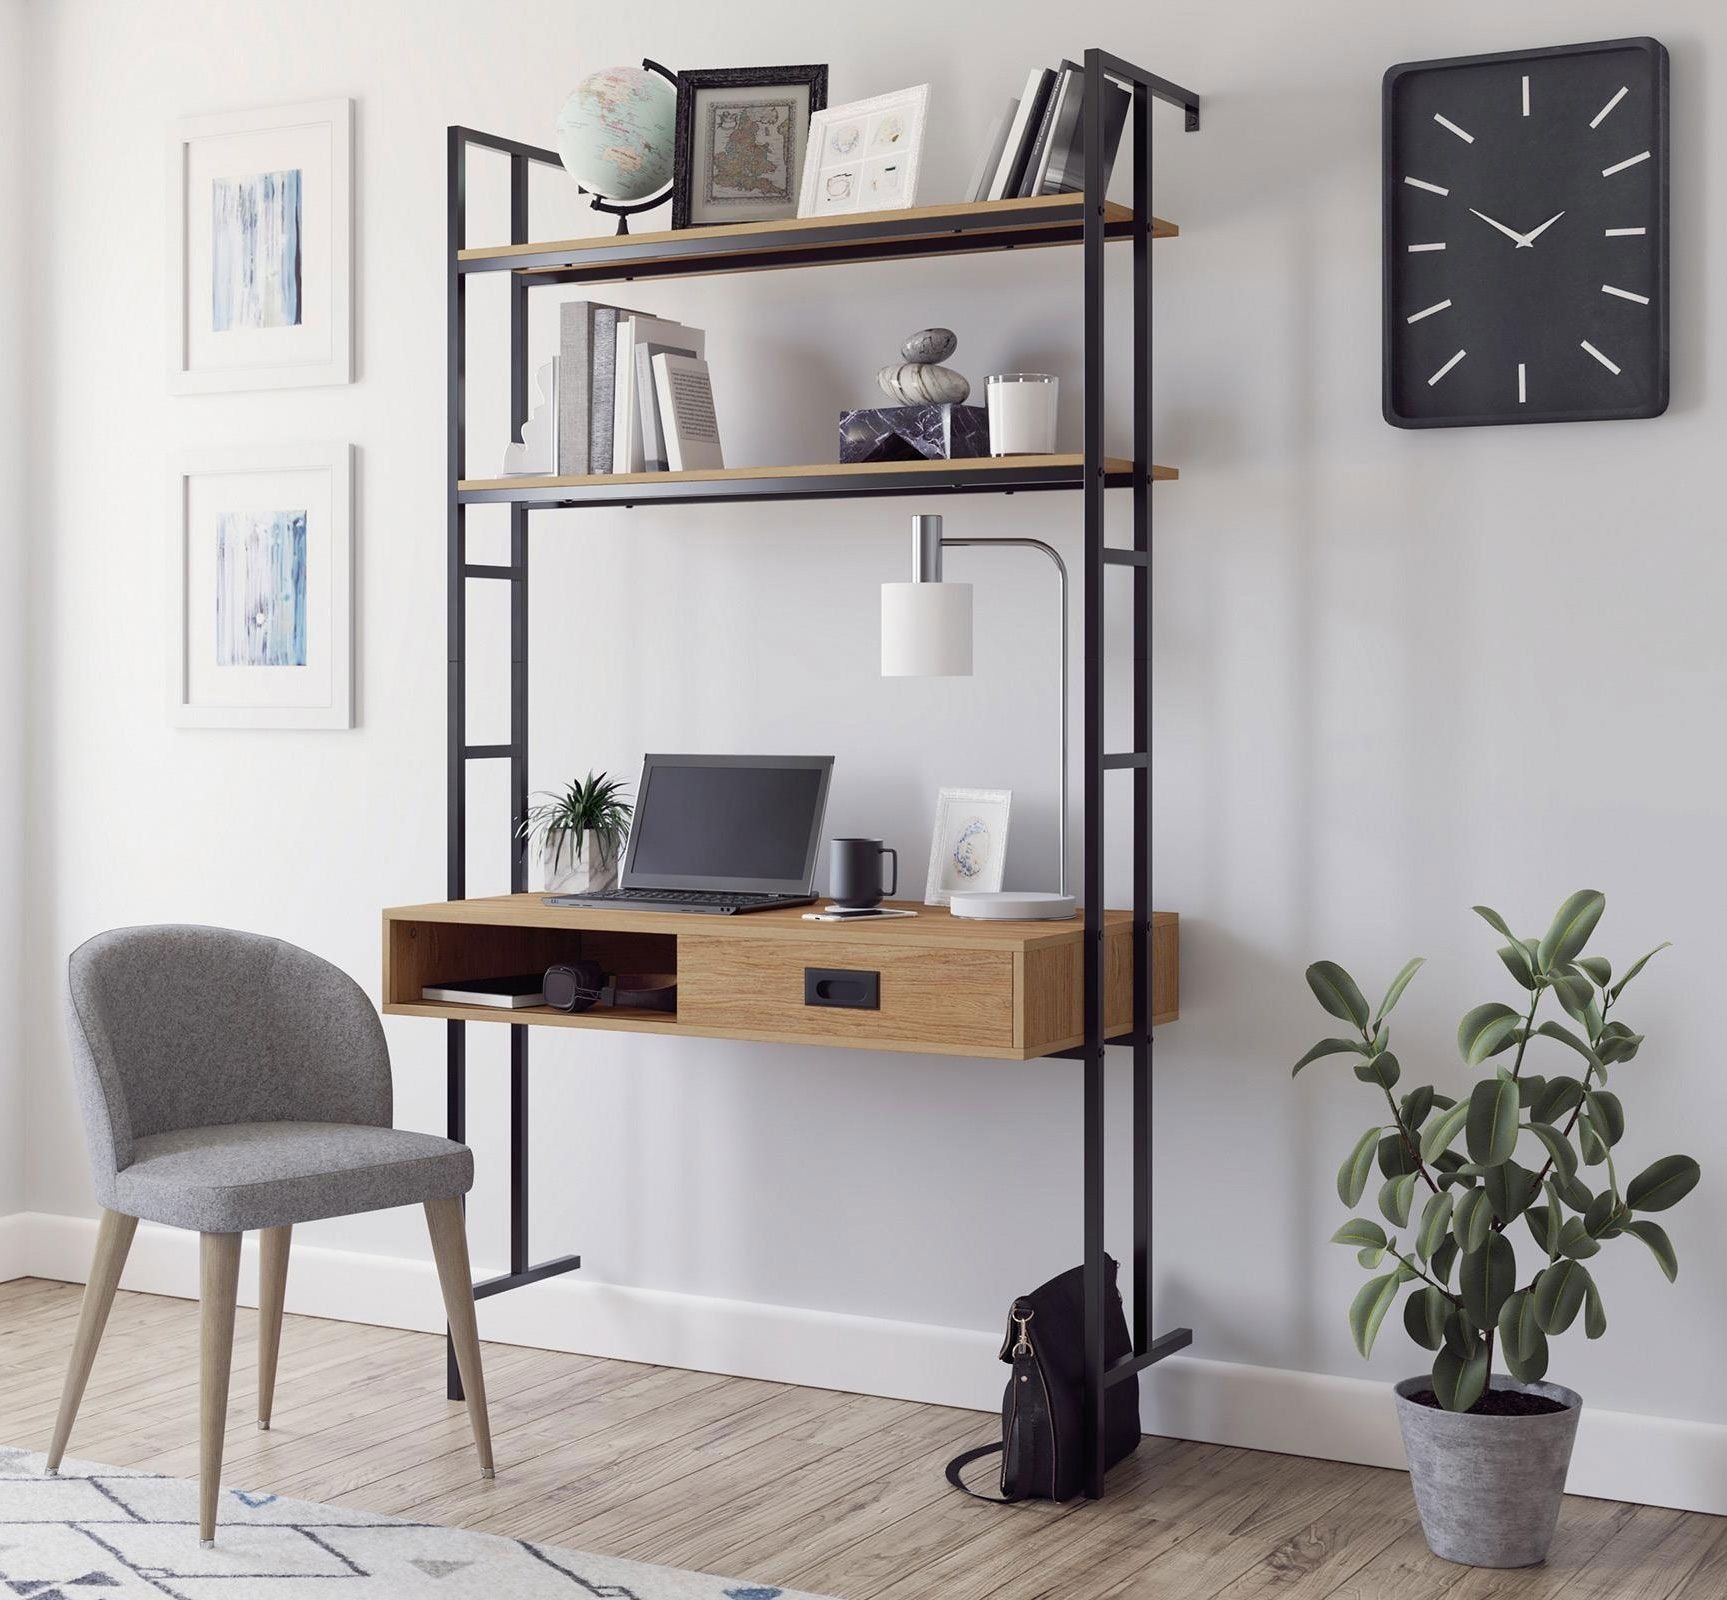 Minimalist Hanging Wall Desk for Small Space | Home Interior Design